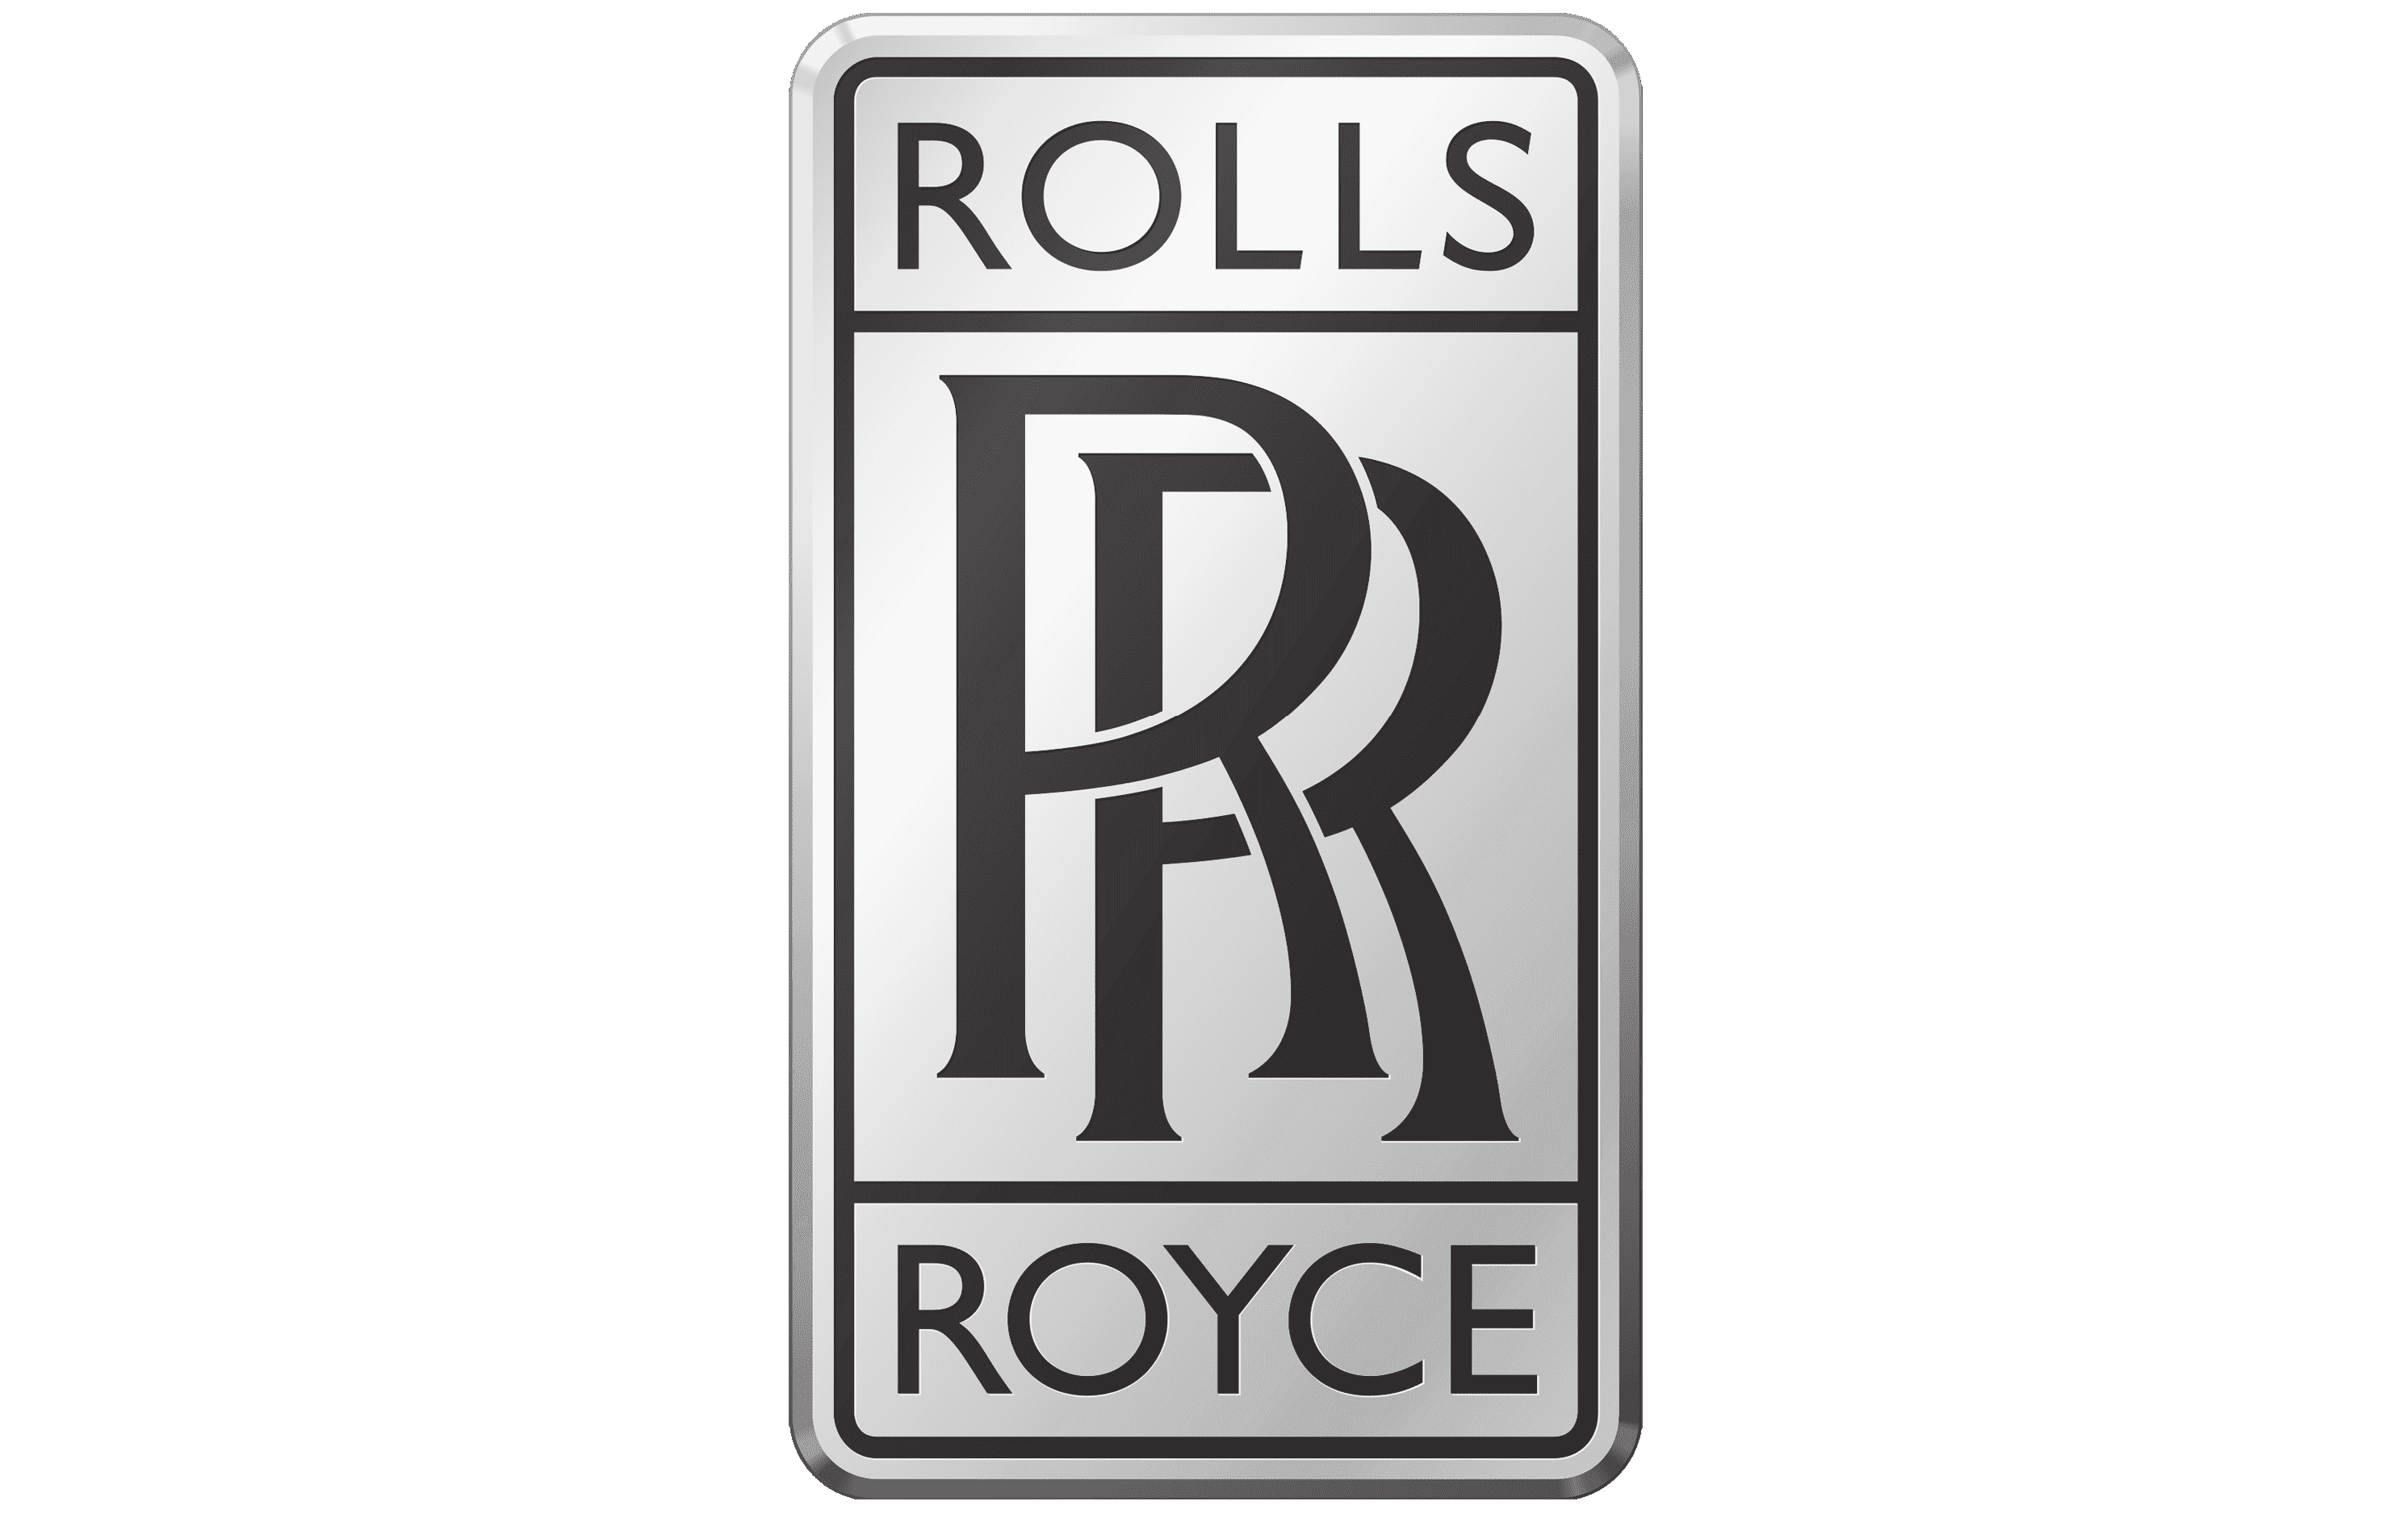 No Reserve Illuminated RollsRoyce Dealership Sign for sale on BaT  Auctions  sold for 6500 on April 30 2022 Lot 71985  Bring a Trailer